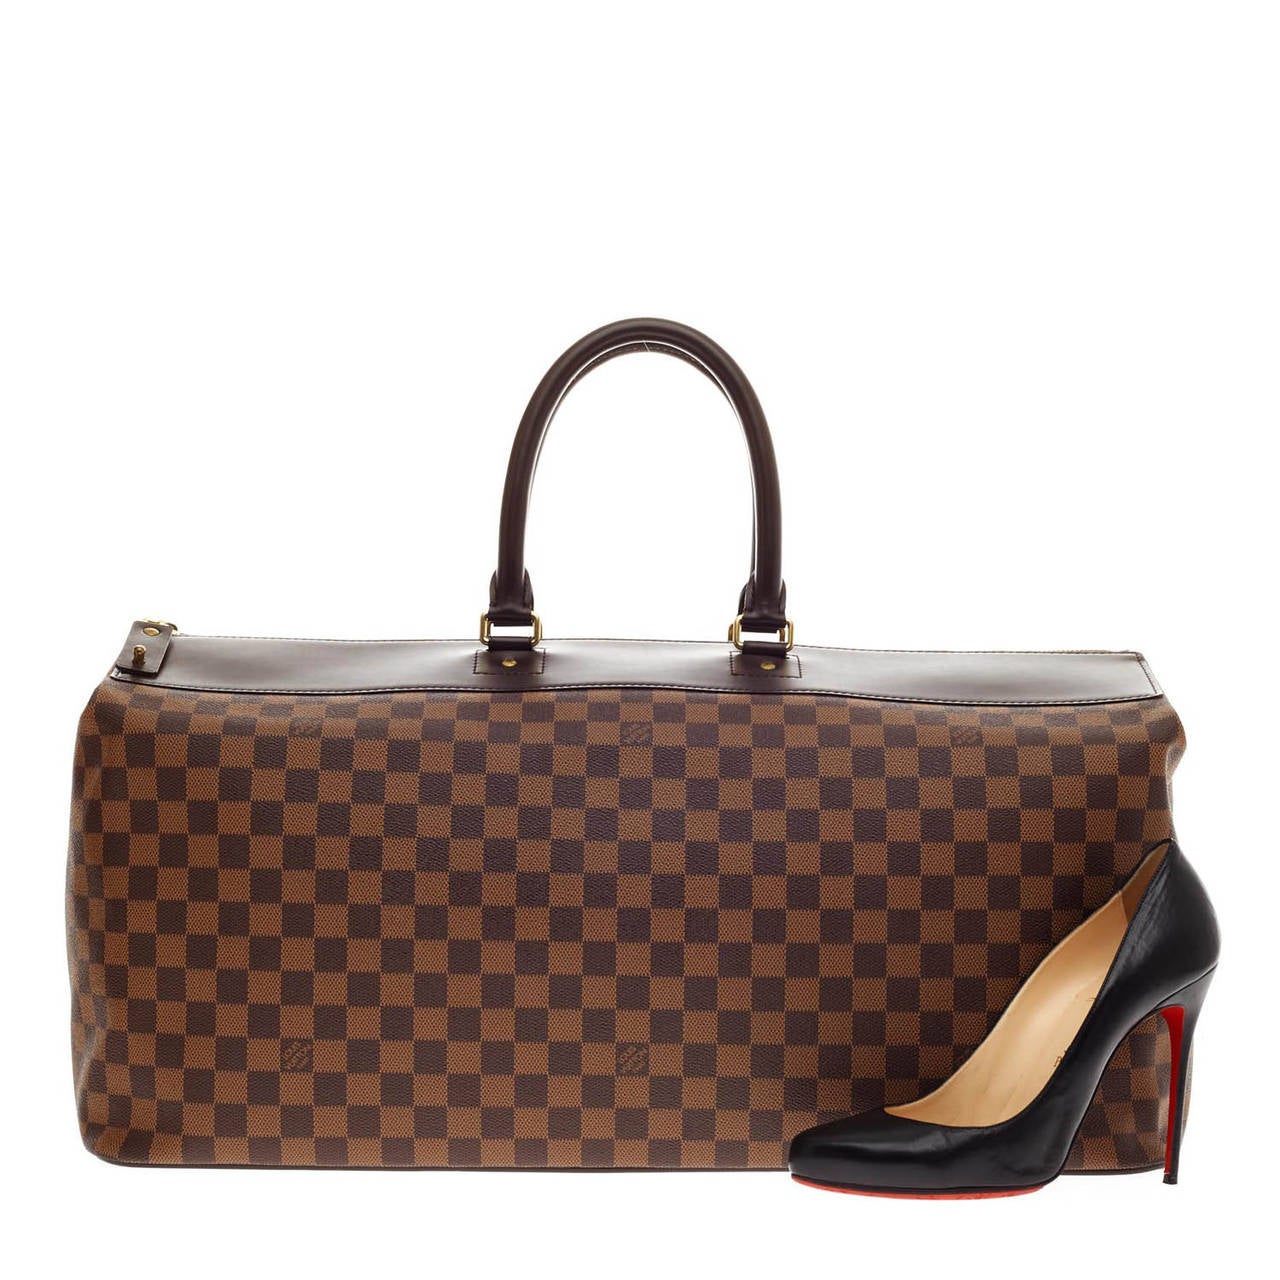 Combining style with functionality, this authentic Louis Vuitton Greenwich in size GM designed in classic Damier Ebene Monogram print and coated canvas is the perfect travel companion. This limited luggage bag features a sturdy top leather panel